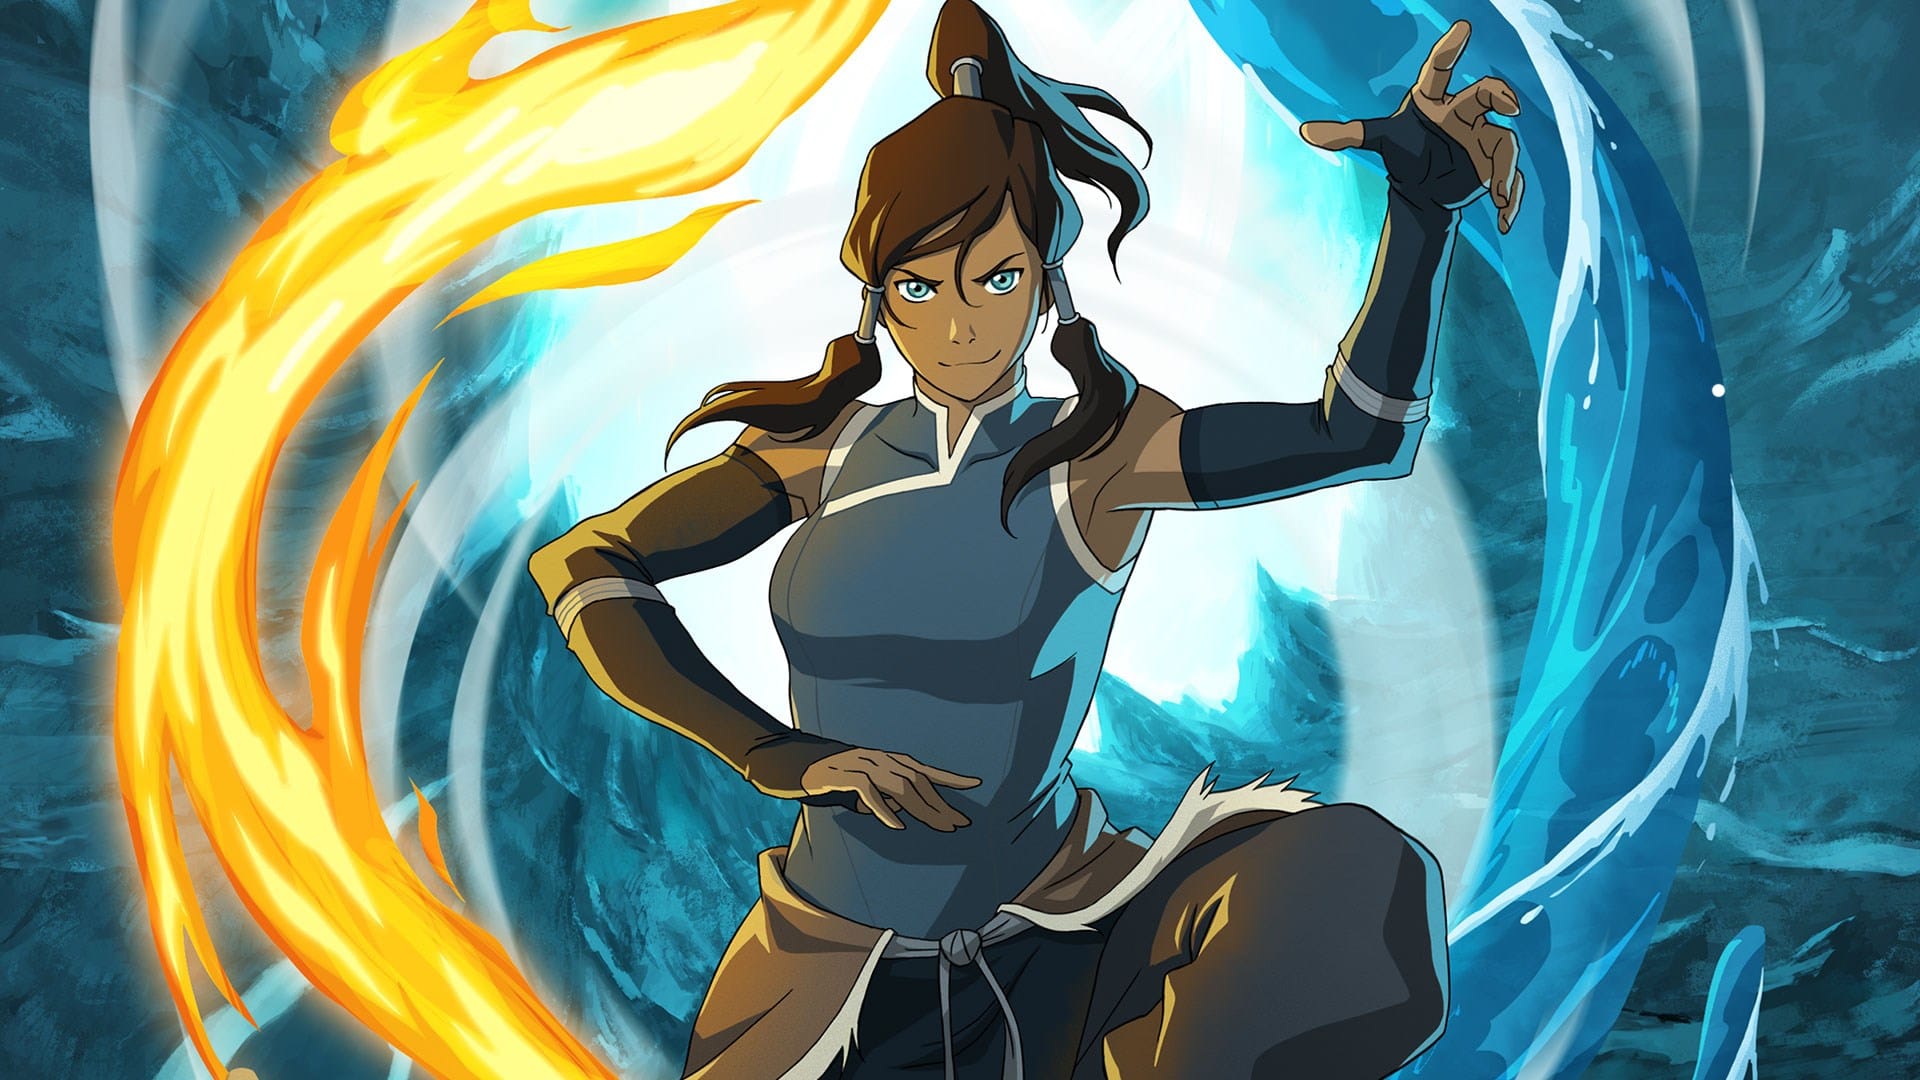 The Legend of Korra is Coming to Netflix in August Following Avatar: The Last Airbender’s Resurgence